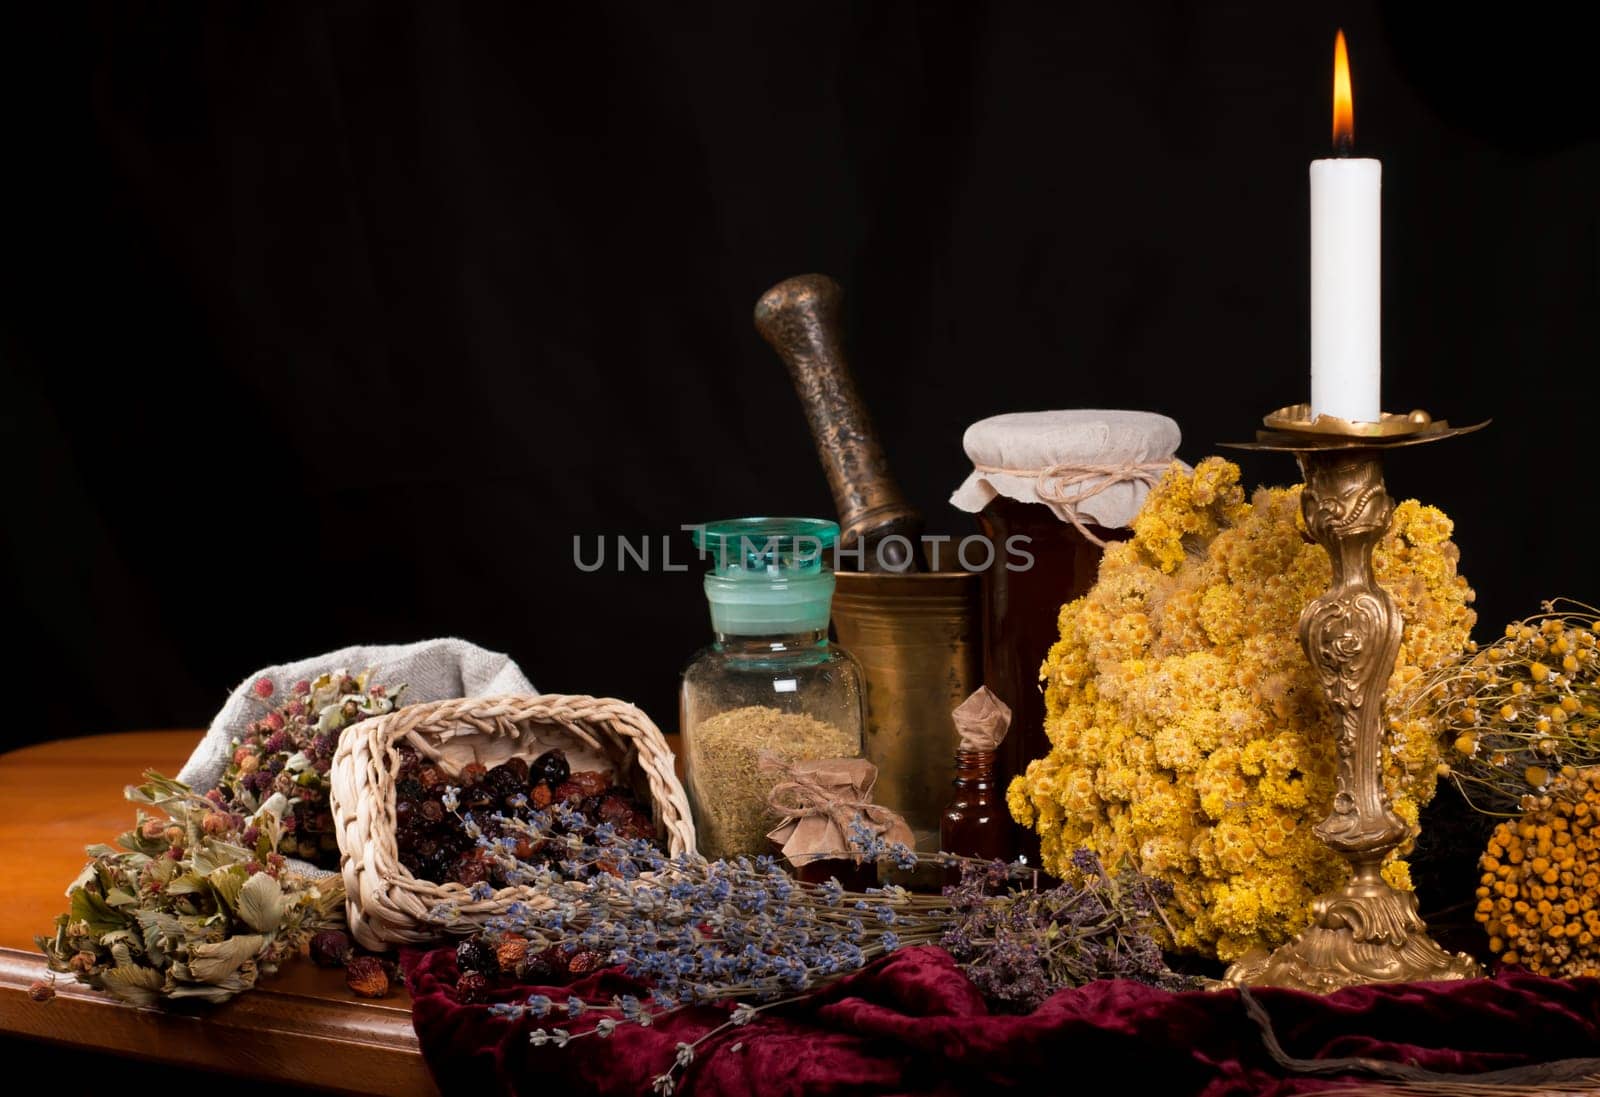 Dried healing herbs, flowers and candles, ritual purification , copyspace Close up of healing herbs alchemist stuff. Old pharmacy, alternative medicine concept. mortar and pestle. on a black background. wooden table. Front view. by aprilphoto